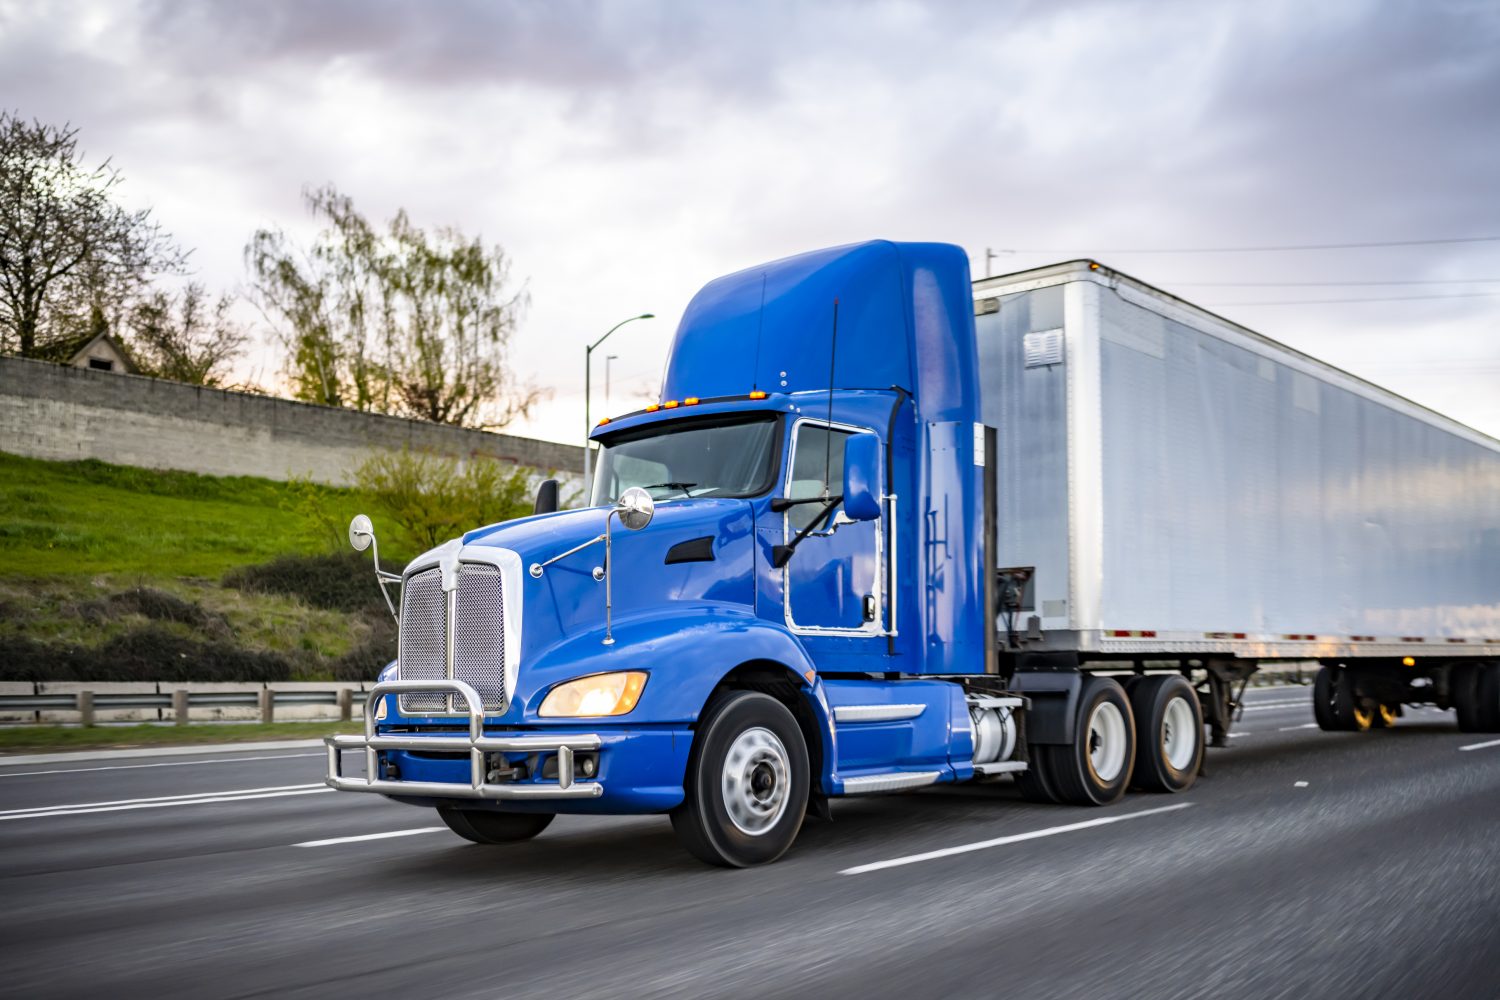 Day cab blue big rig industrial semi trucks tractor with roof spoiler and turn on headlight transporting commercial cargo in dry van semi trailer running on the wide highway road at twilight time